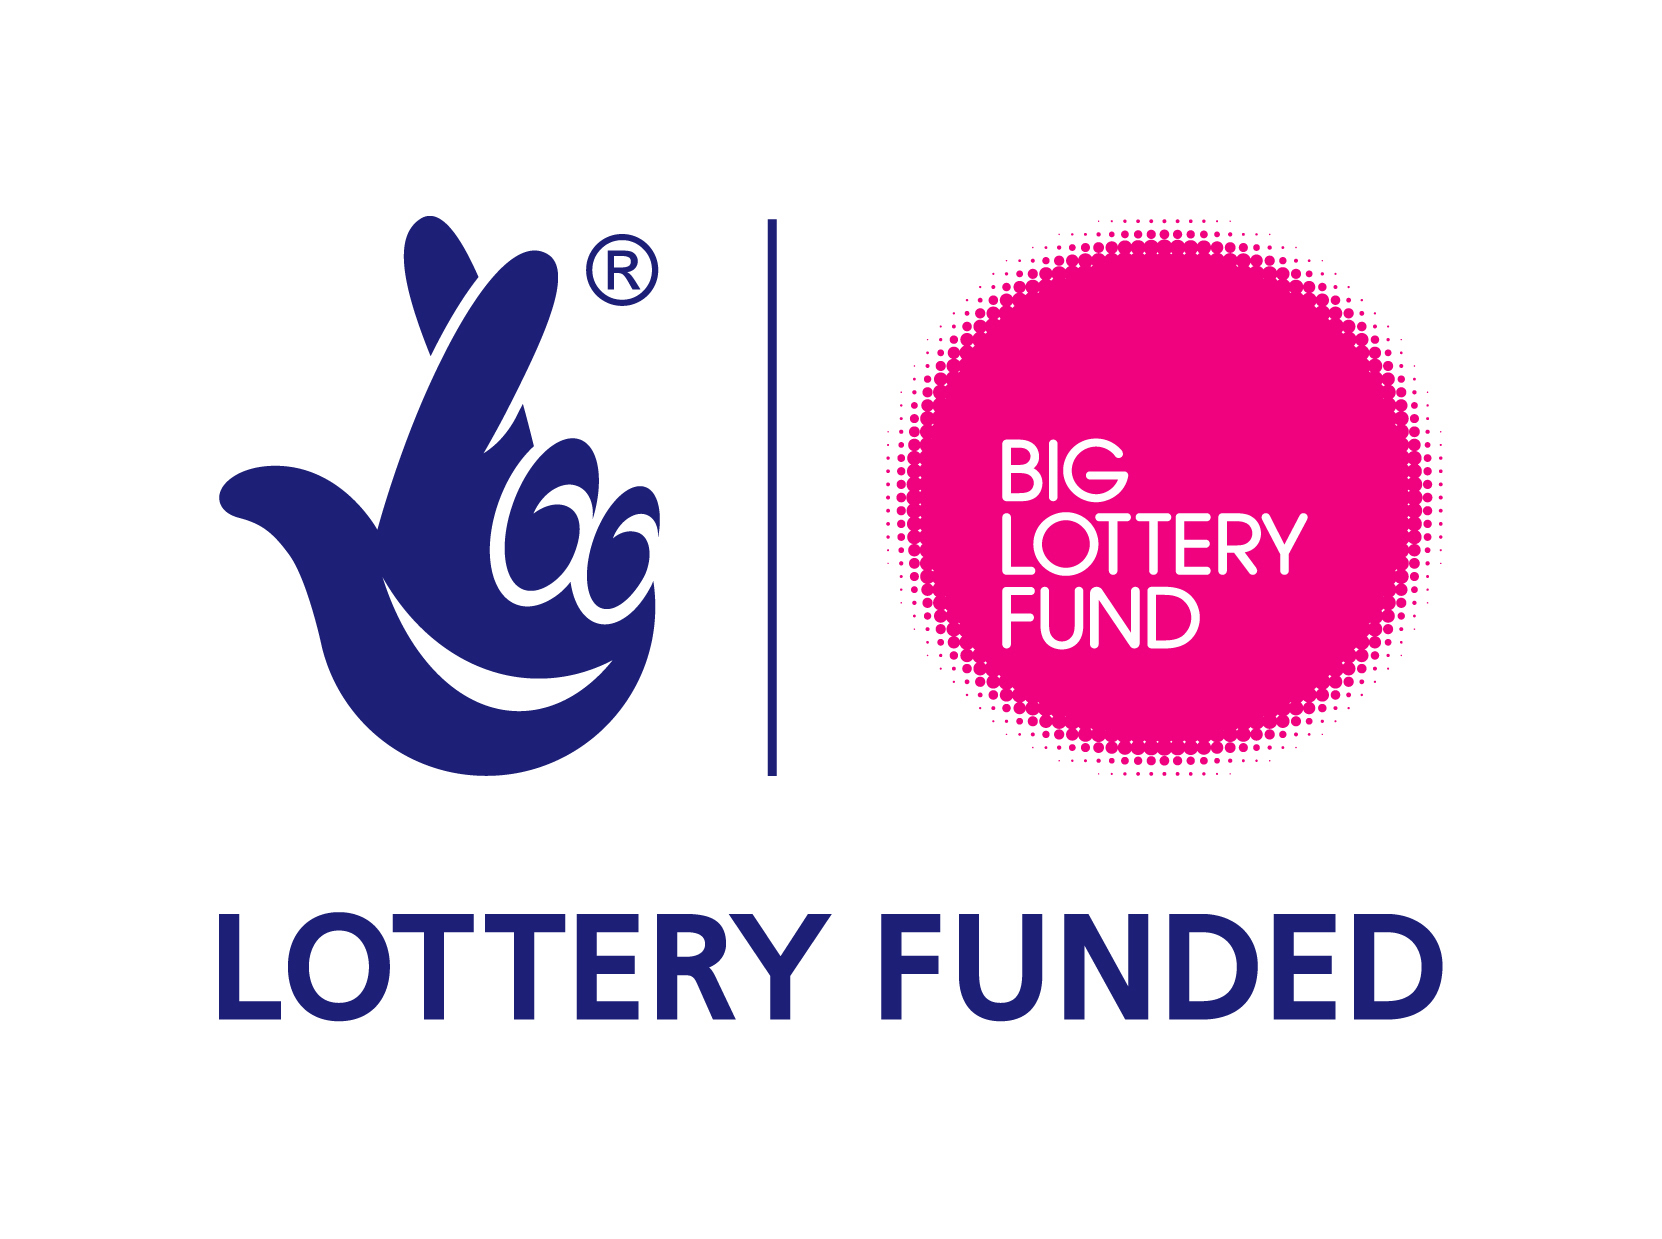 Big Lottery Fund - Lottery Funded